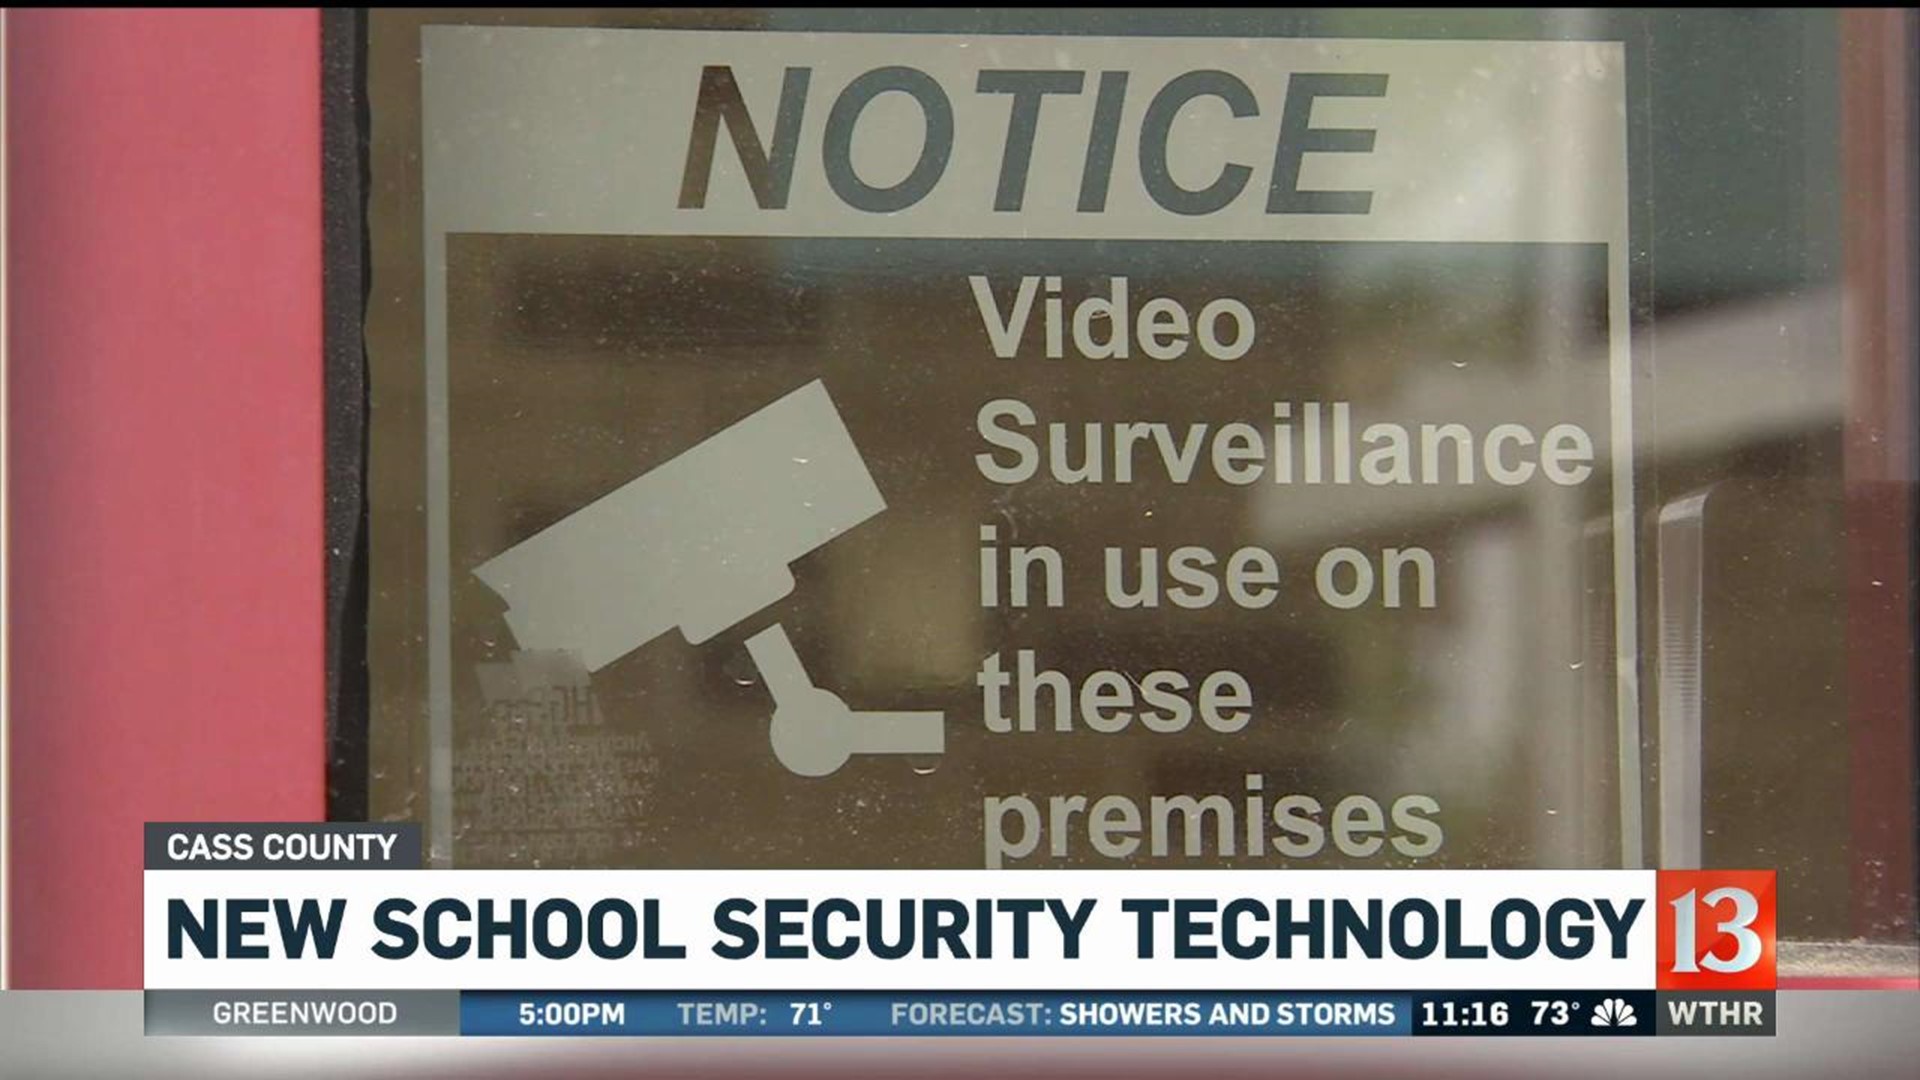 Cass County New School Security Technology